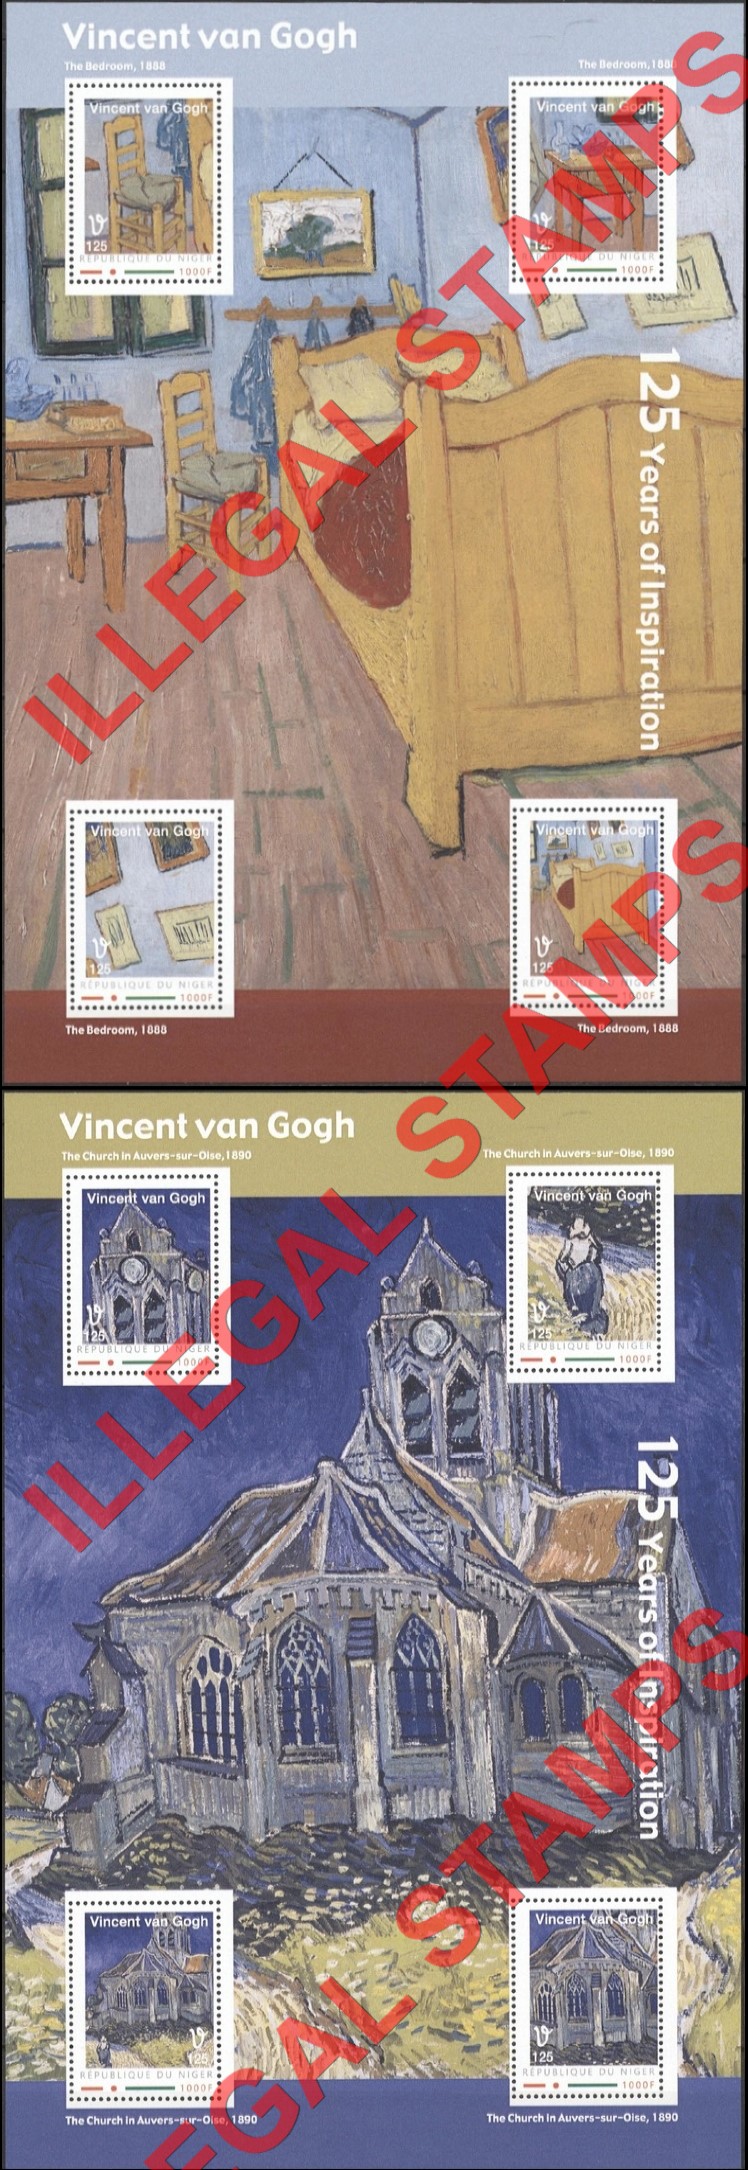 Niger 2012 Paintings by Vincent Van Gogh Illegal Stamp Souvenir Sheets of 4 (Part 5)